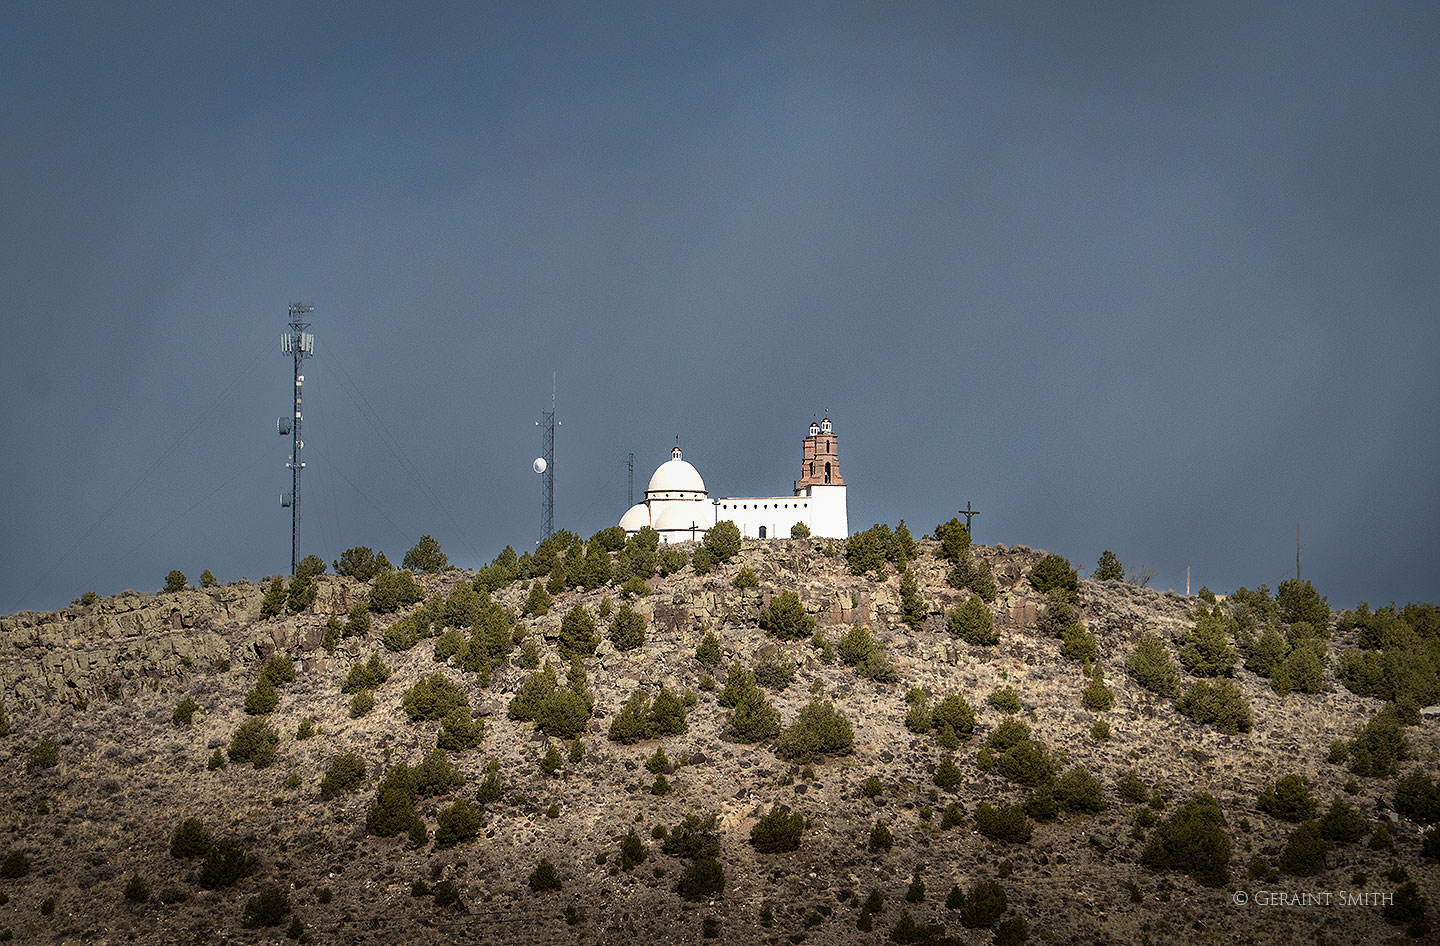 Stations of the cross shrine, and cell towers, San Luis Colorado